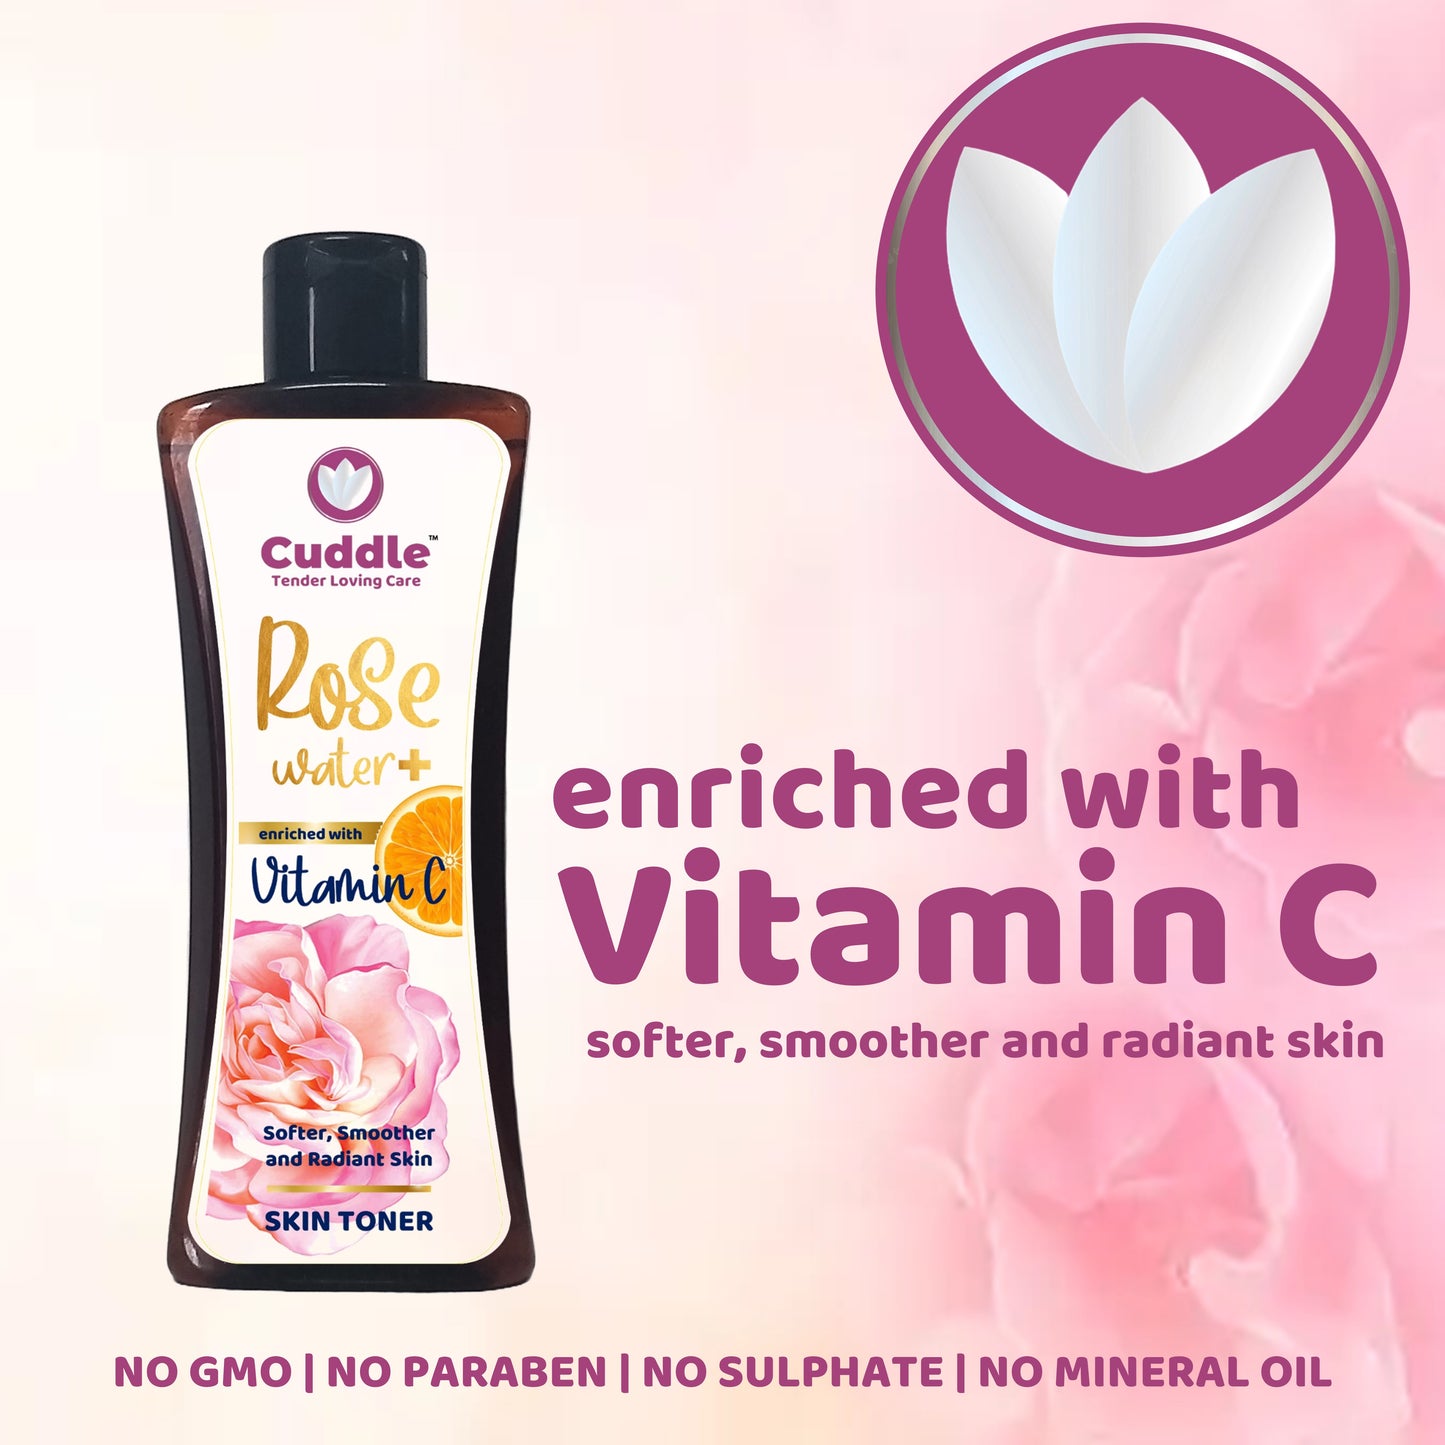 Cuddle Rose Water+ With Vitamin C 200 ml